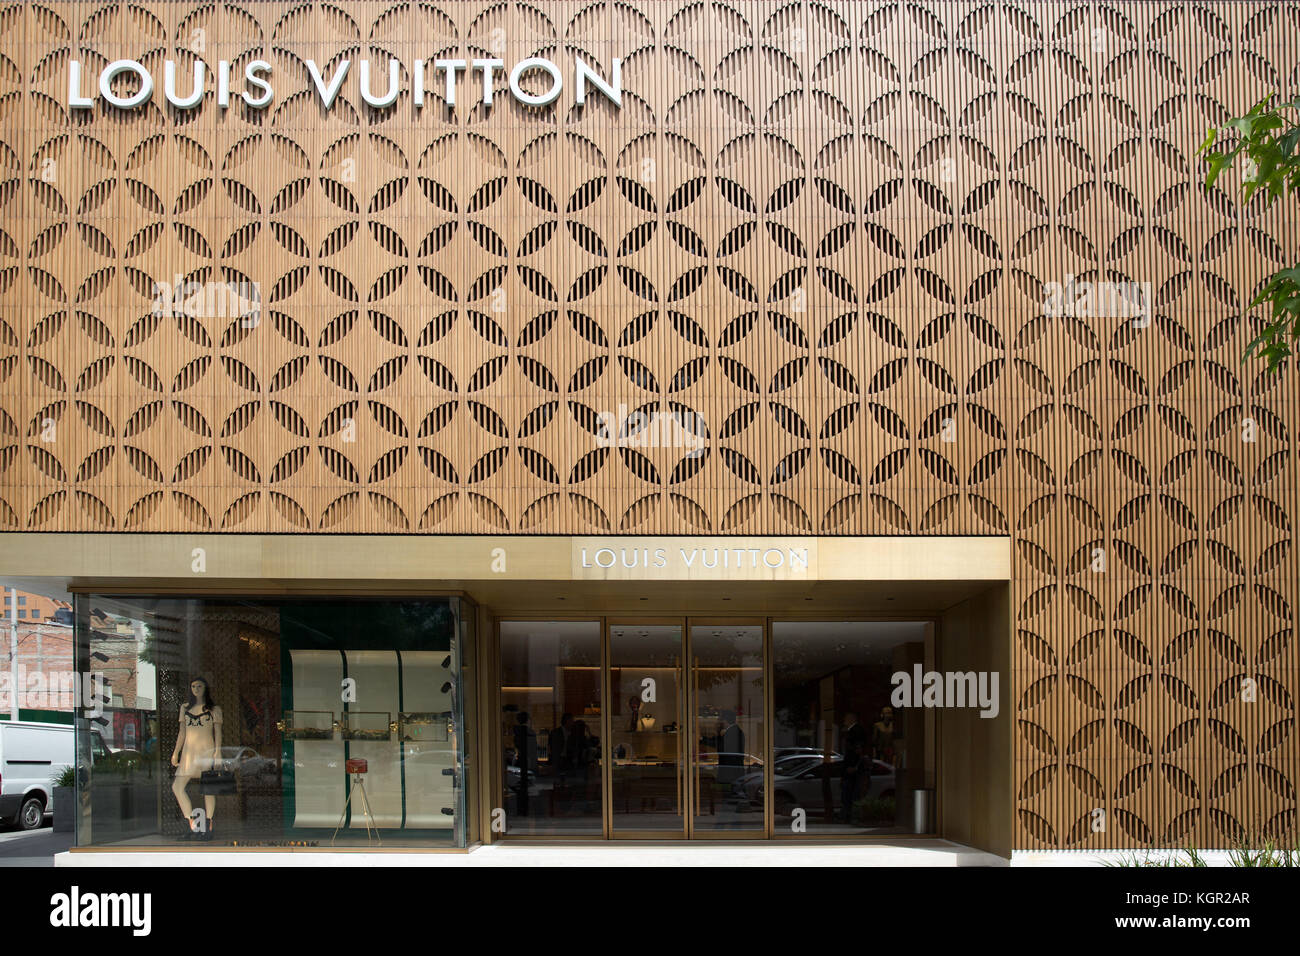 The Louis Vuitton Store in President Masaryk street in Mexico City Stock Photo: 165234575 - Alamy